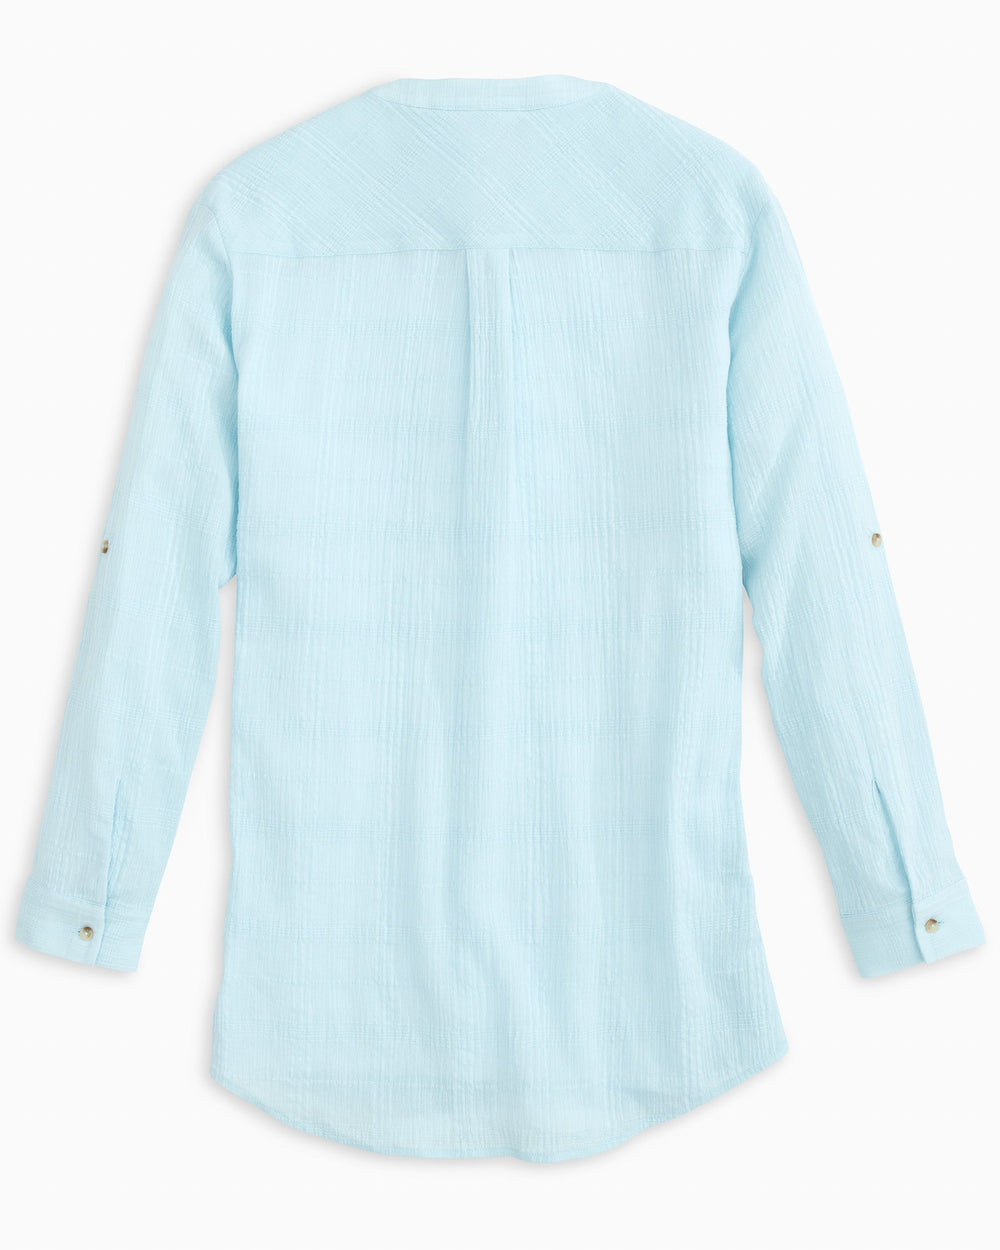 The back of the Women's Marnee Textured Tunic by Southern Tide - Palm Ocean